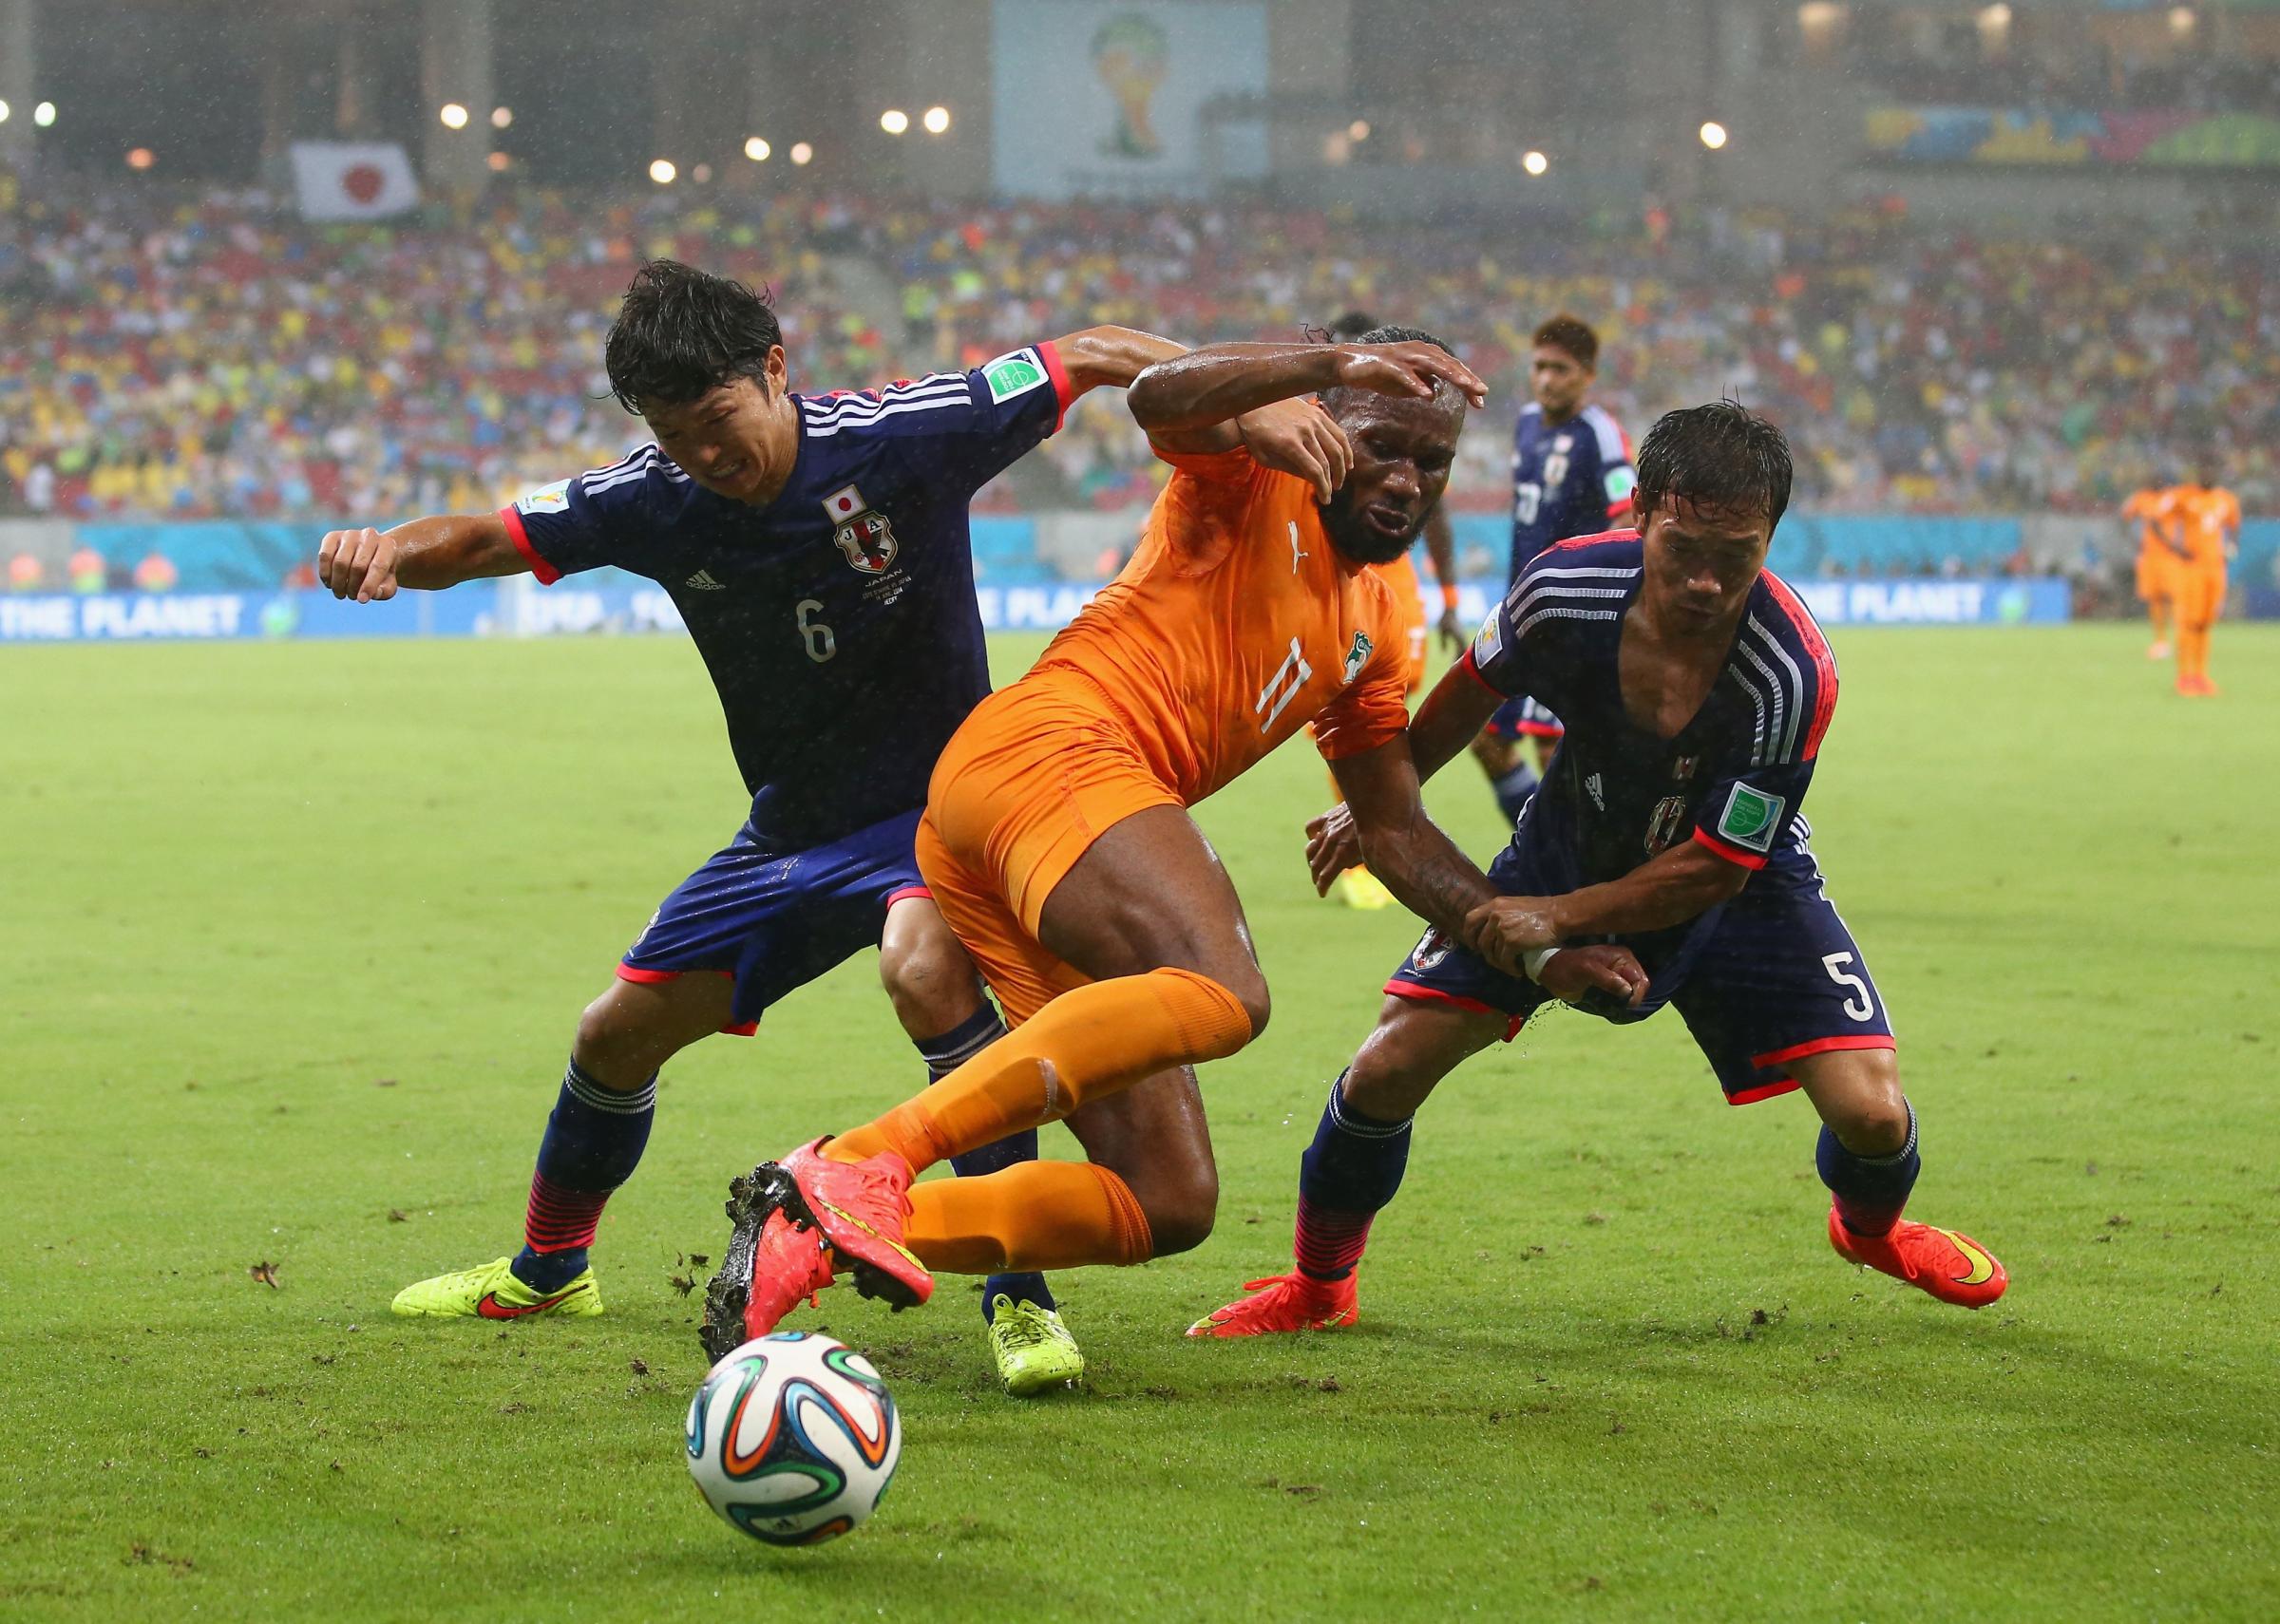 Masato Morishige and Yuto Nagatomo of Japan challenge Didier Drogba of the Ivory Coast during the 2014 FIFA World Cup Brazil Group C match between the Ivory Coast and Japan at Arena Pernambuco on June 14, 2014 in Recife, Brazil.